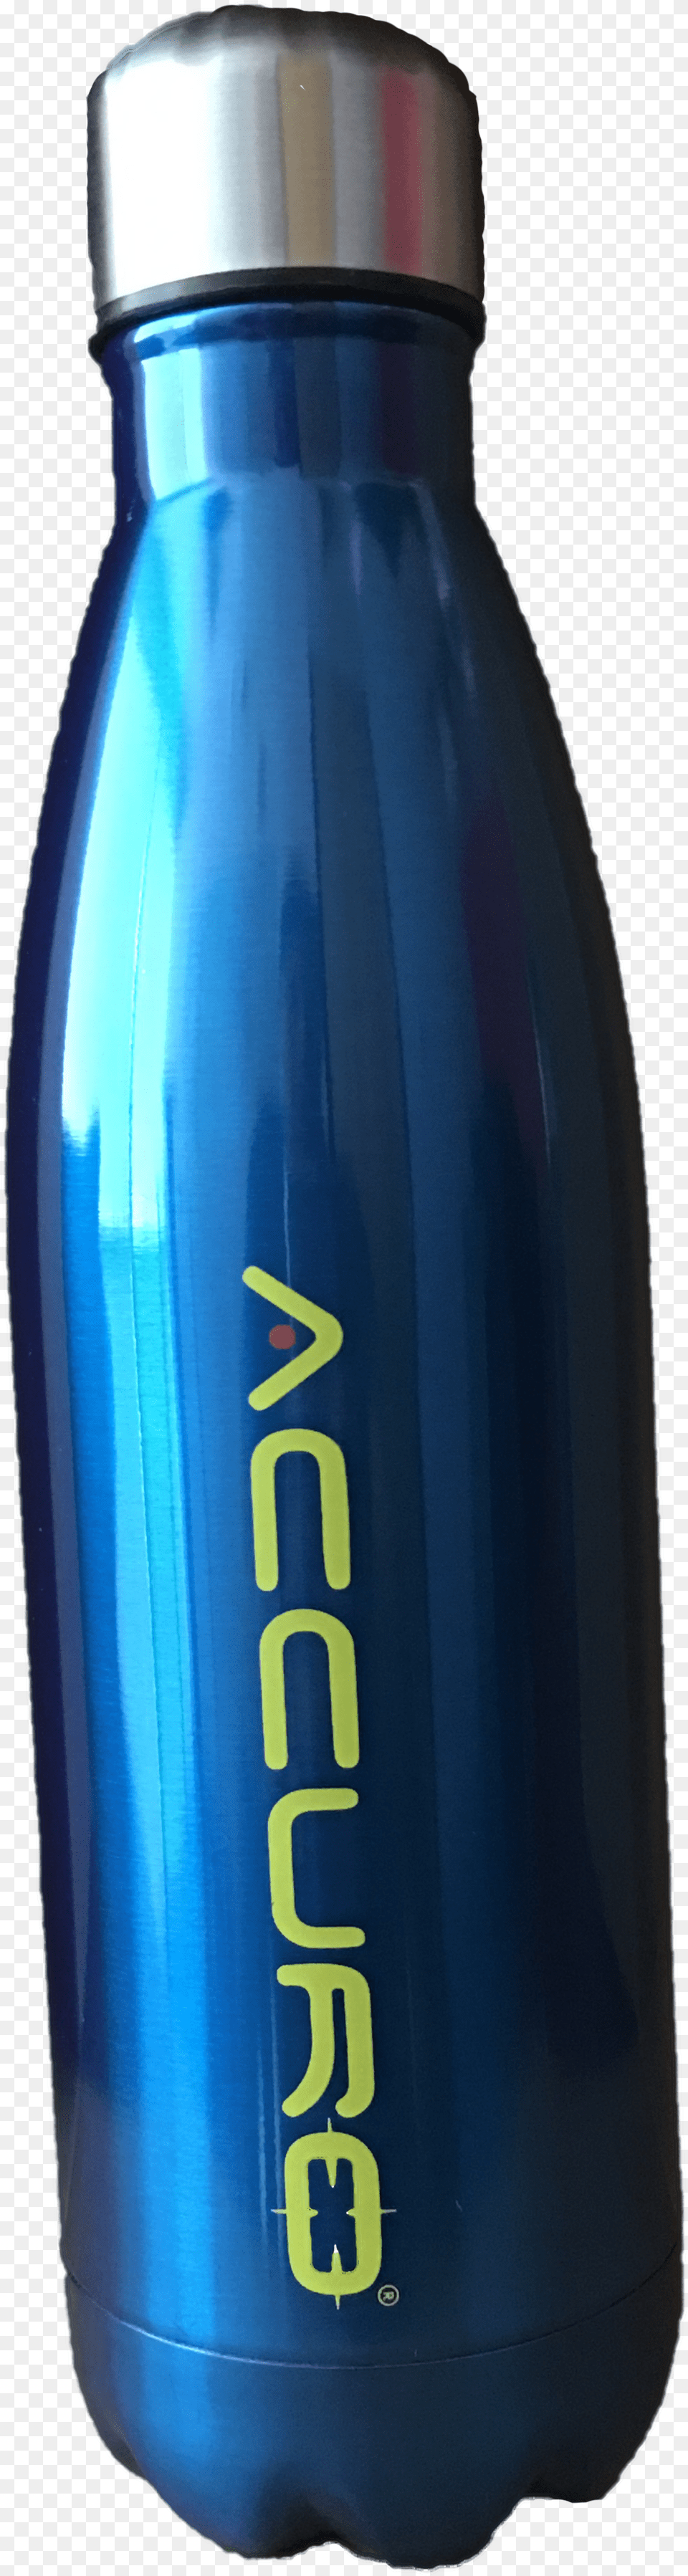 Drinking Water Bottle Water Bottle, Water Bottle, Shaker Png